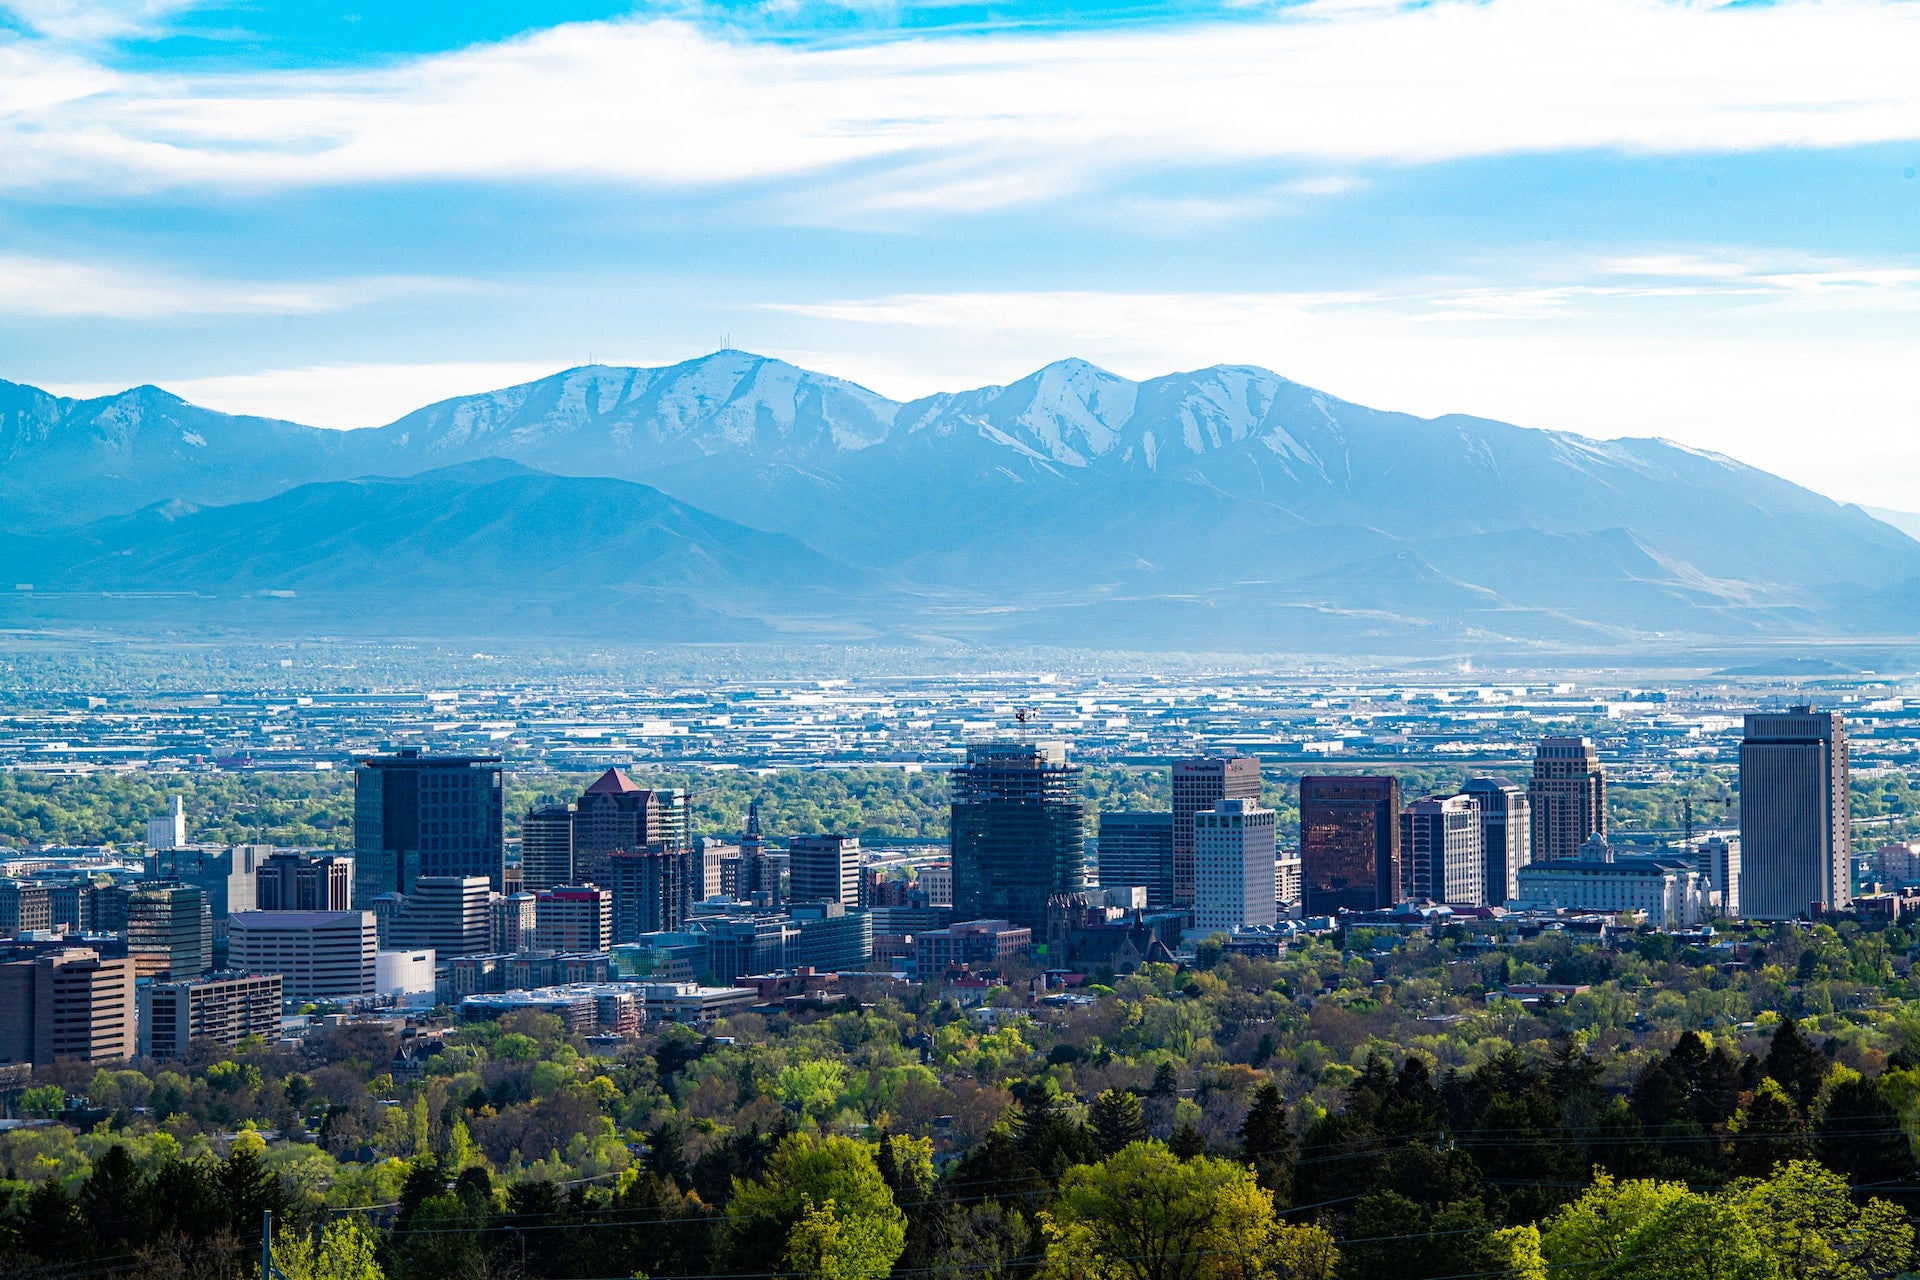 A high view of Salt Lake City, Utah on a bright sunny day with trees in the foreground, mountains in the background, and the city in the center of the frame